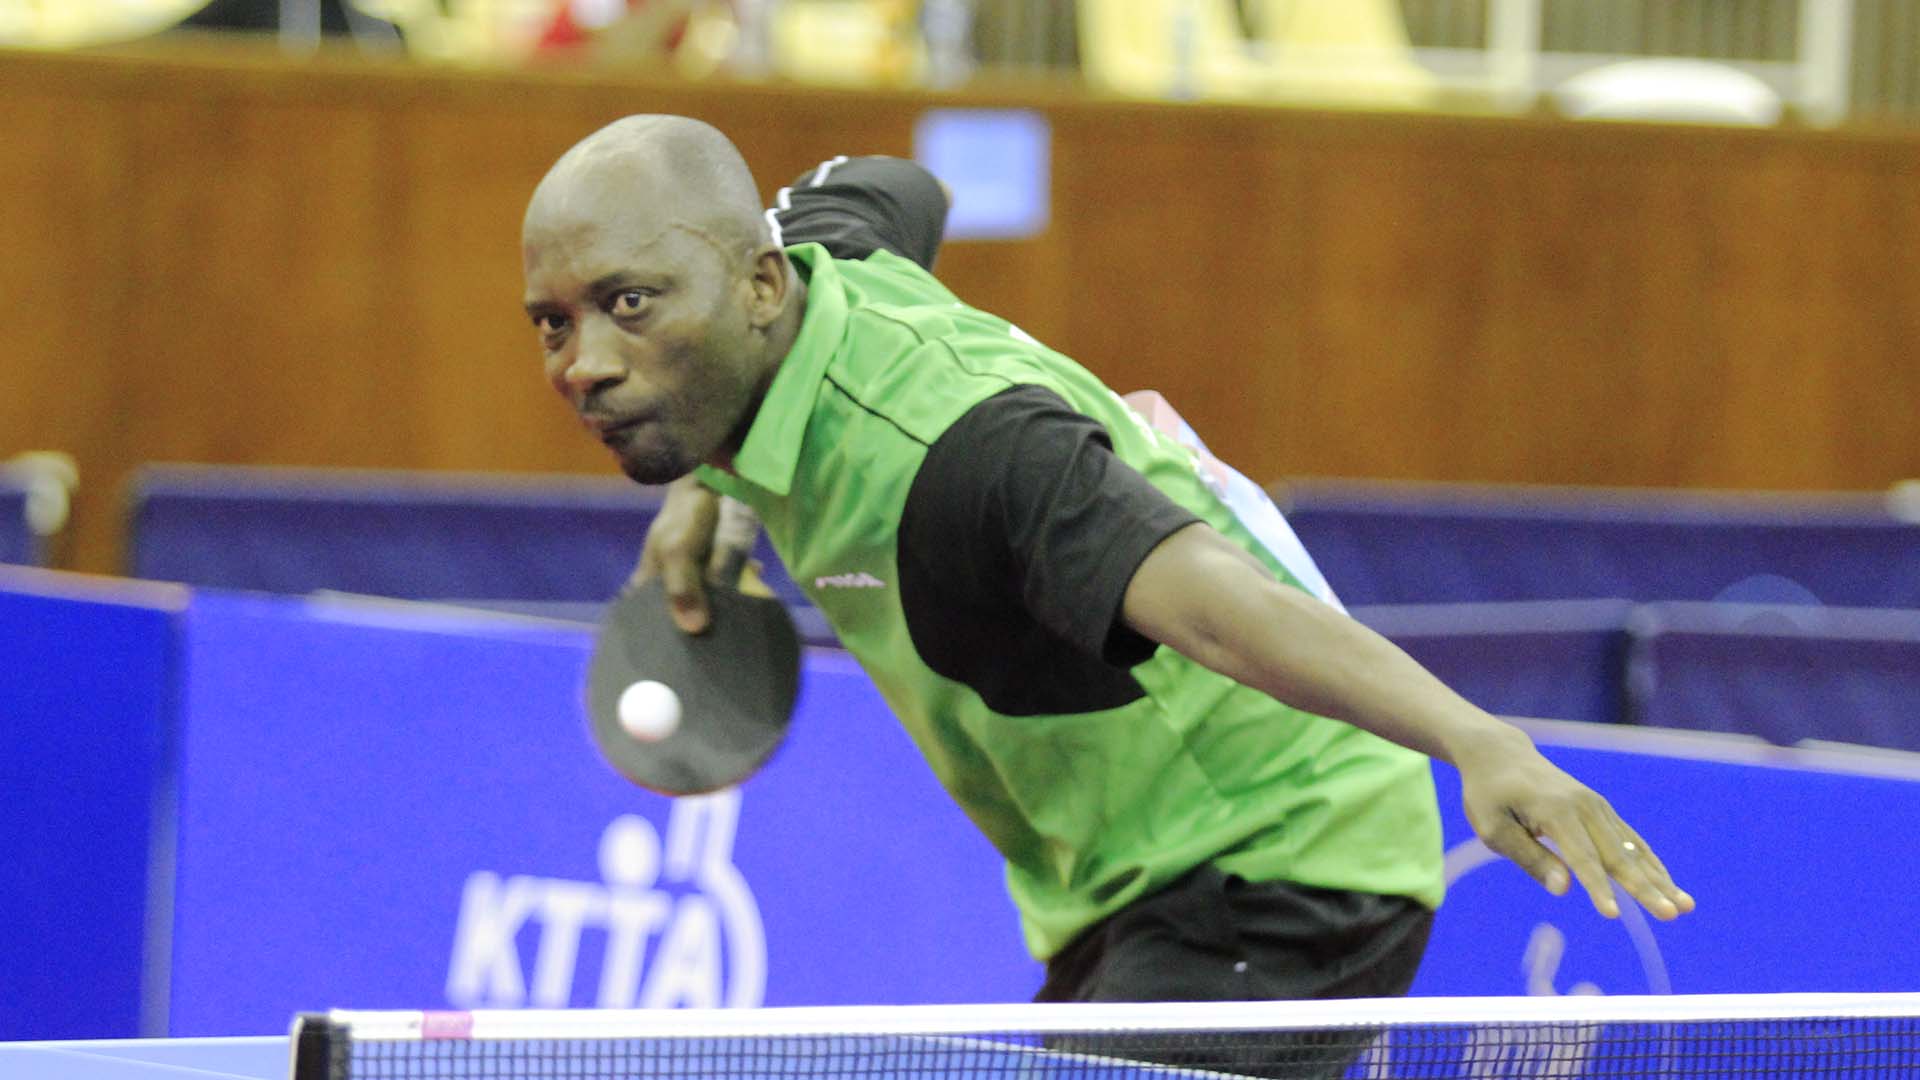 Nigeria is through to the quarter final in table tennis at the Africa Games